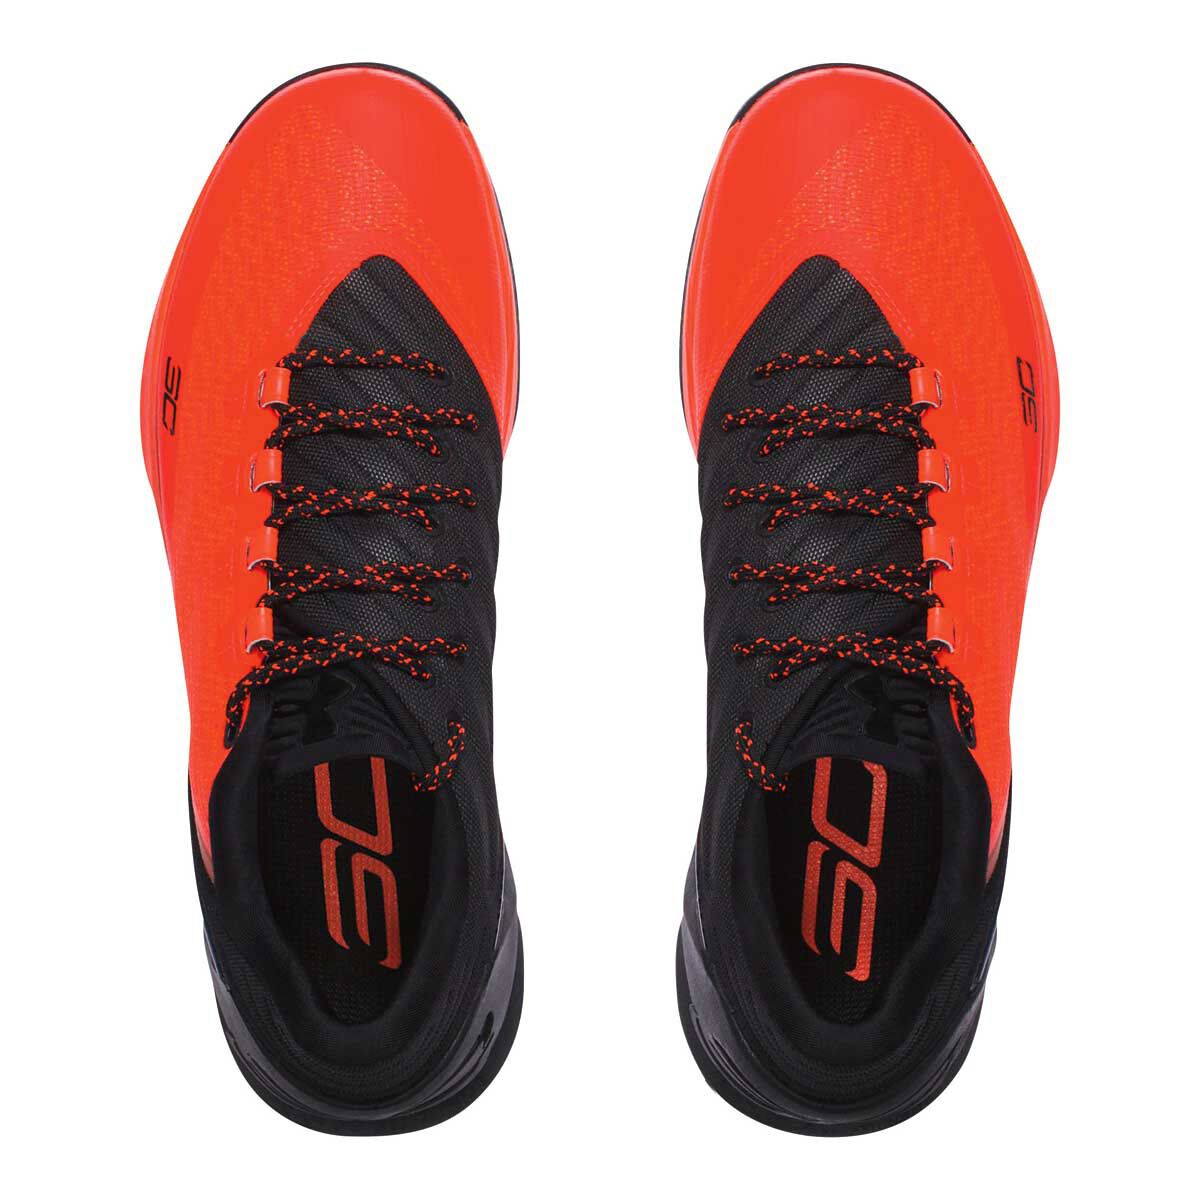 curry 3 low orange and black